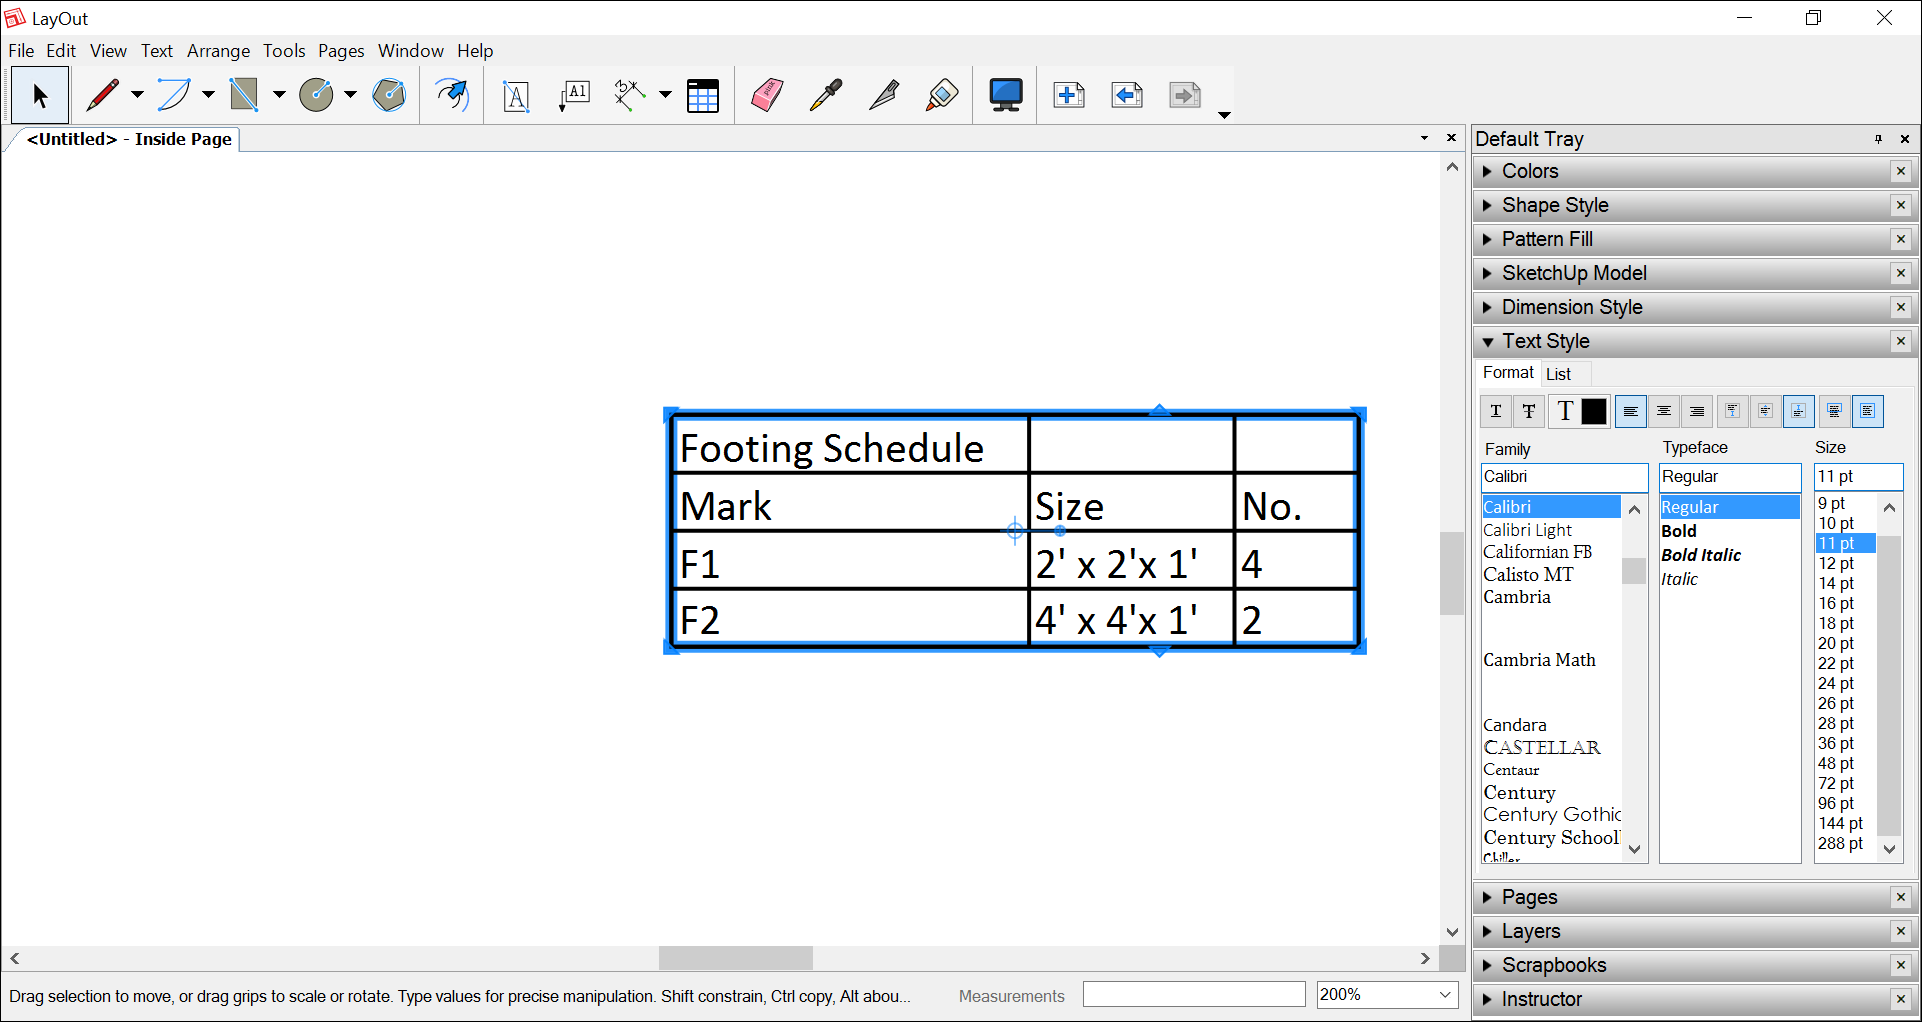 In LayOut, you can insert data from a spreadsheet as a table entity